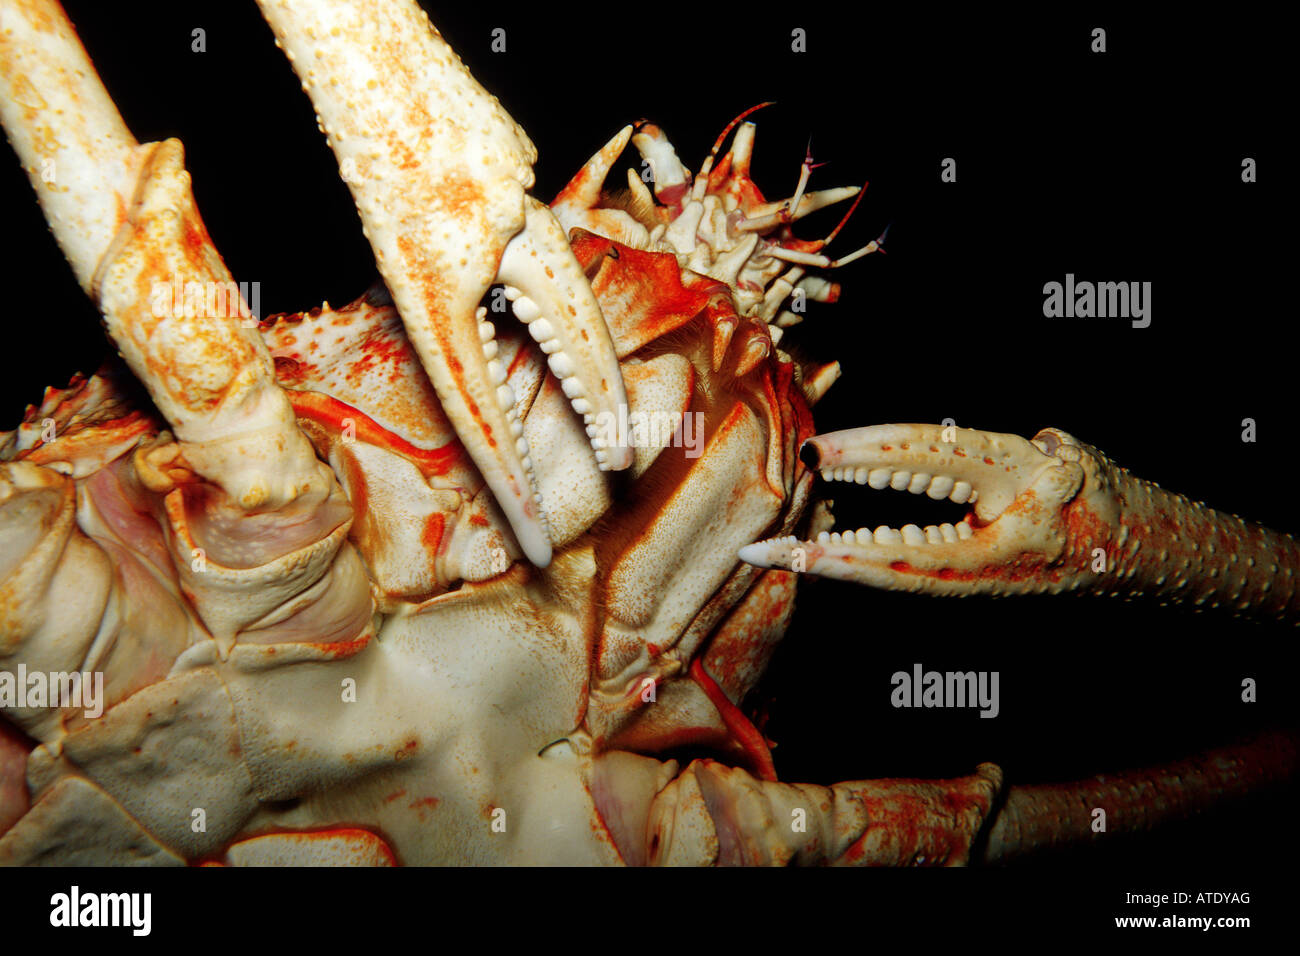 Giant spider crab Macrocheira kaempferi can measure up to 26 feet across and is the world s largest crab Japan c Stock Photo